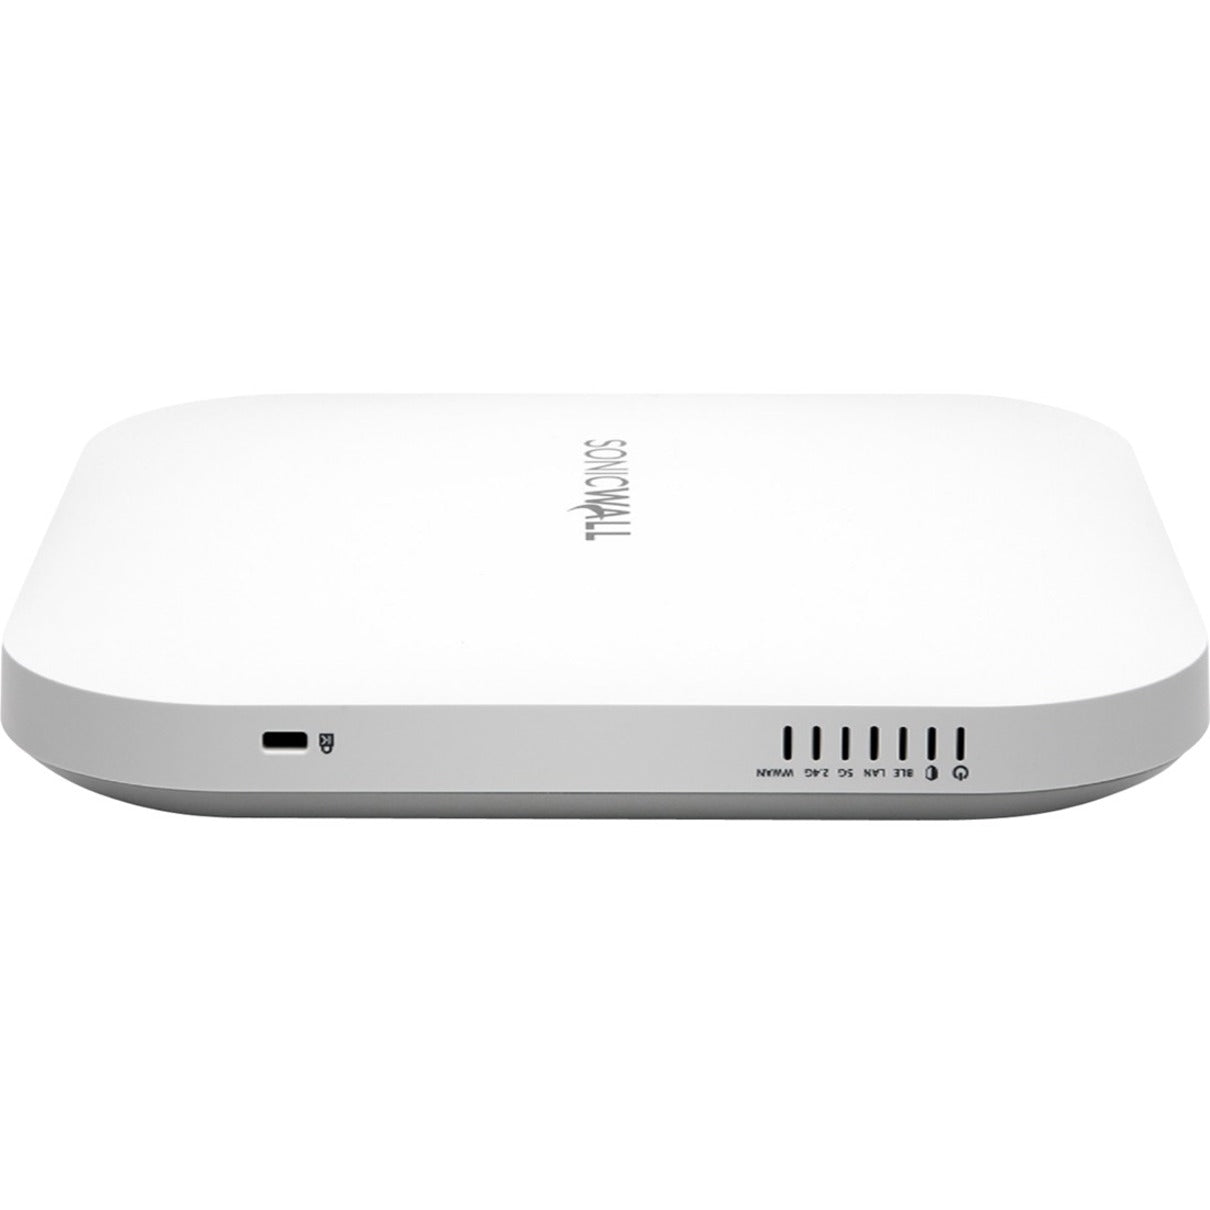 SonicWall 03-SSC-0307 SonicWave 641 Wireless Access Point, Advanced Secure Wireless Network Management and Support 3YR